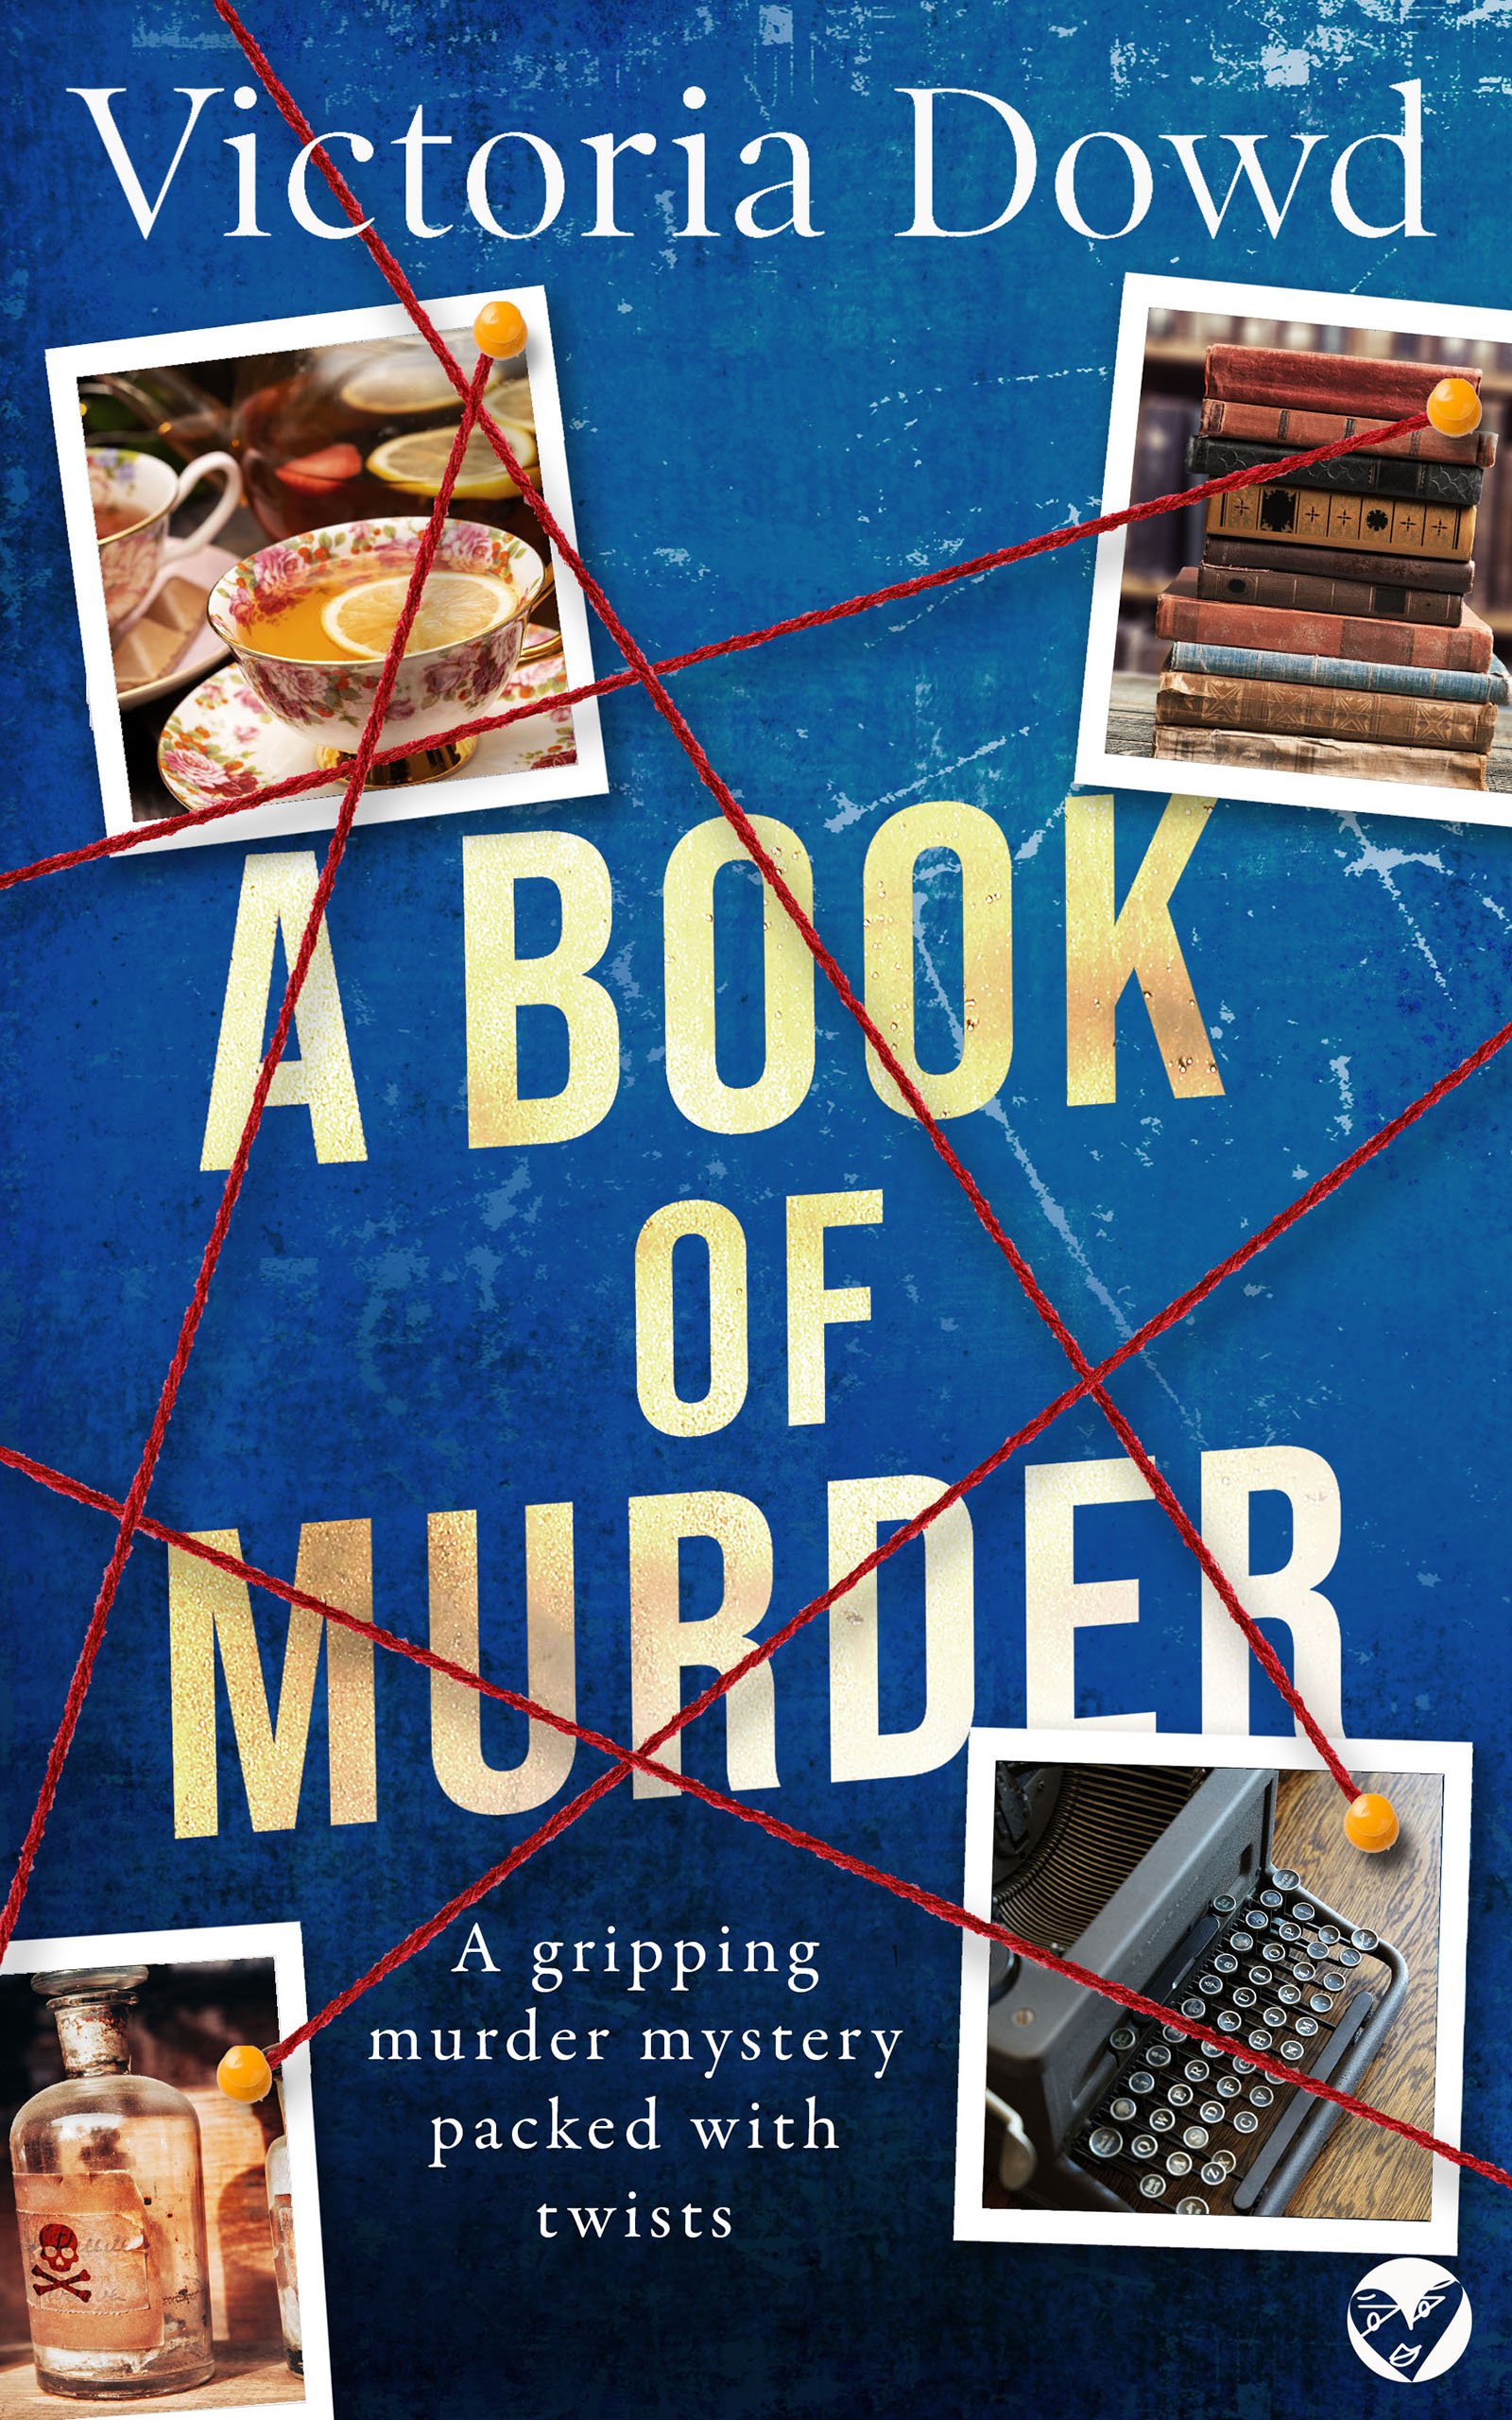 A BOOK OF MURDER Cover publish.jpg